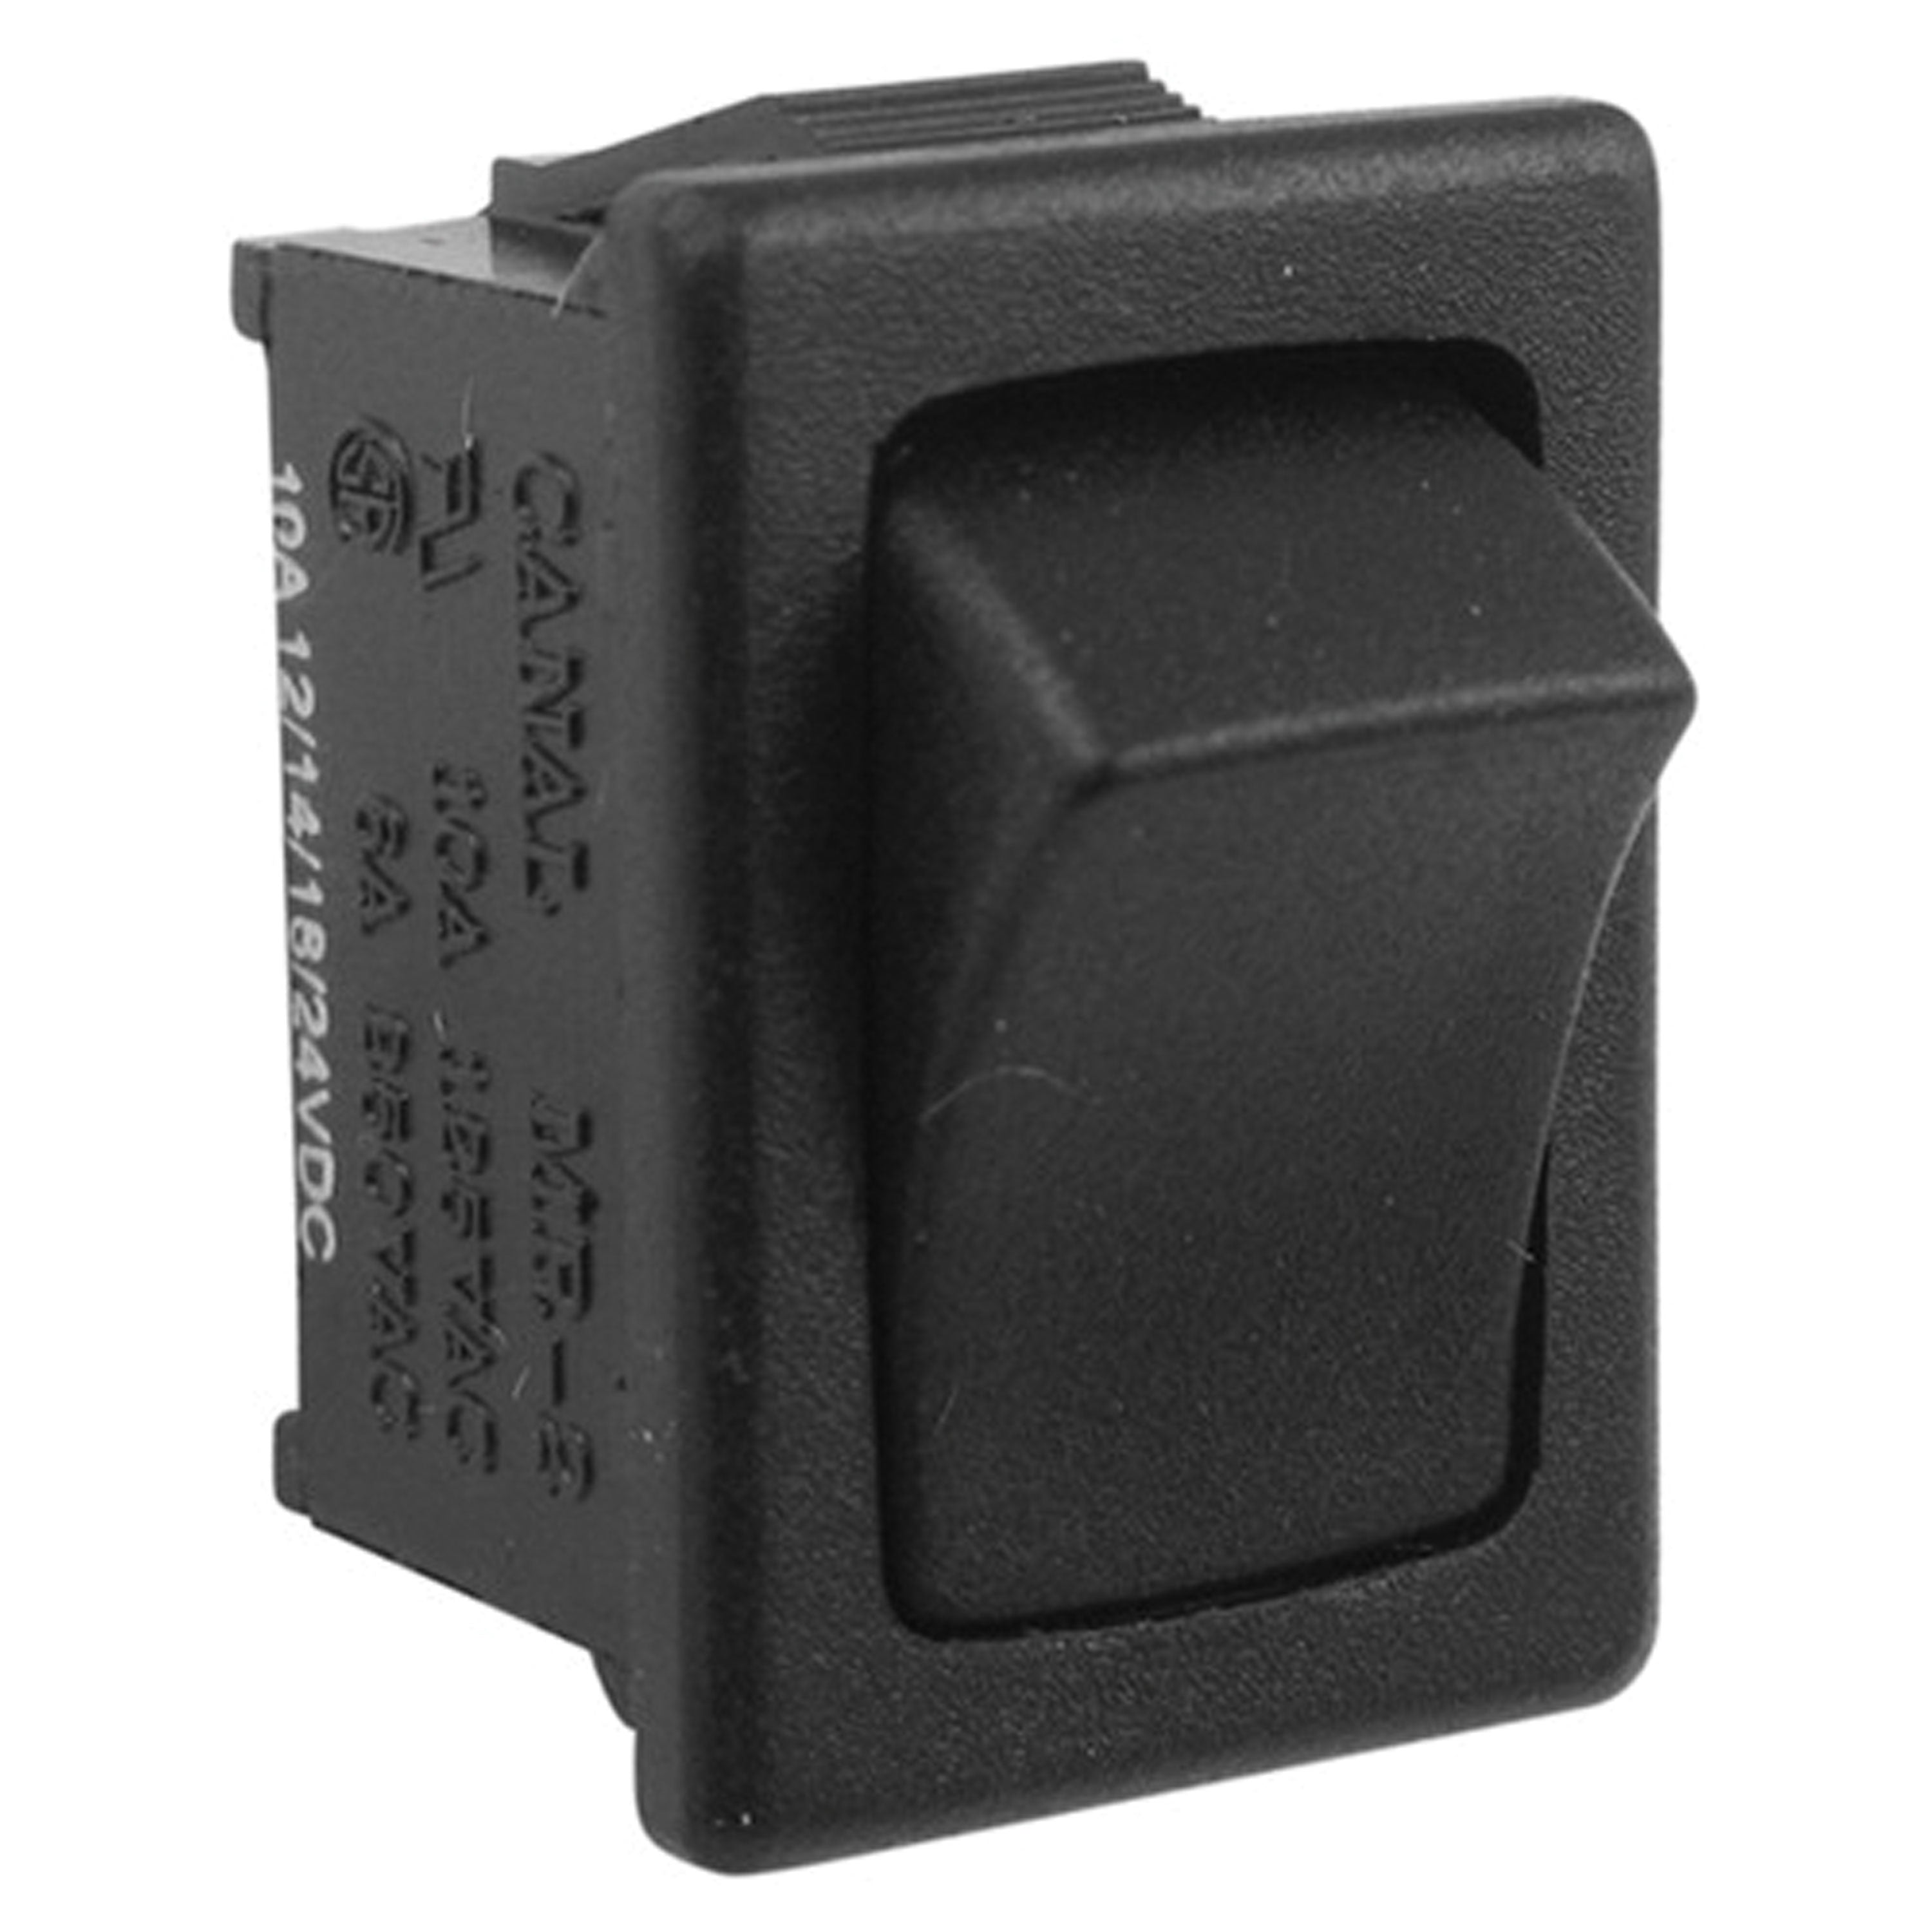 Ventline BL0108-00-05 Replacement Mini On/Off Rocker Switch for Ventadome Roof Vents